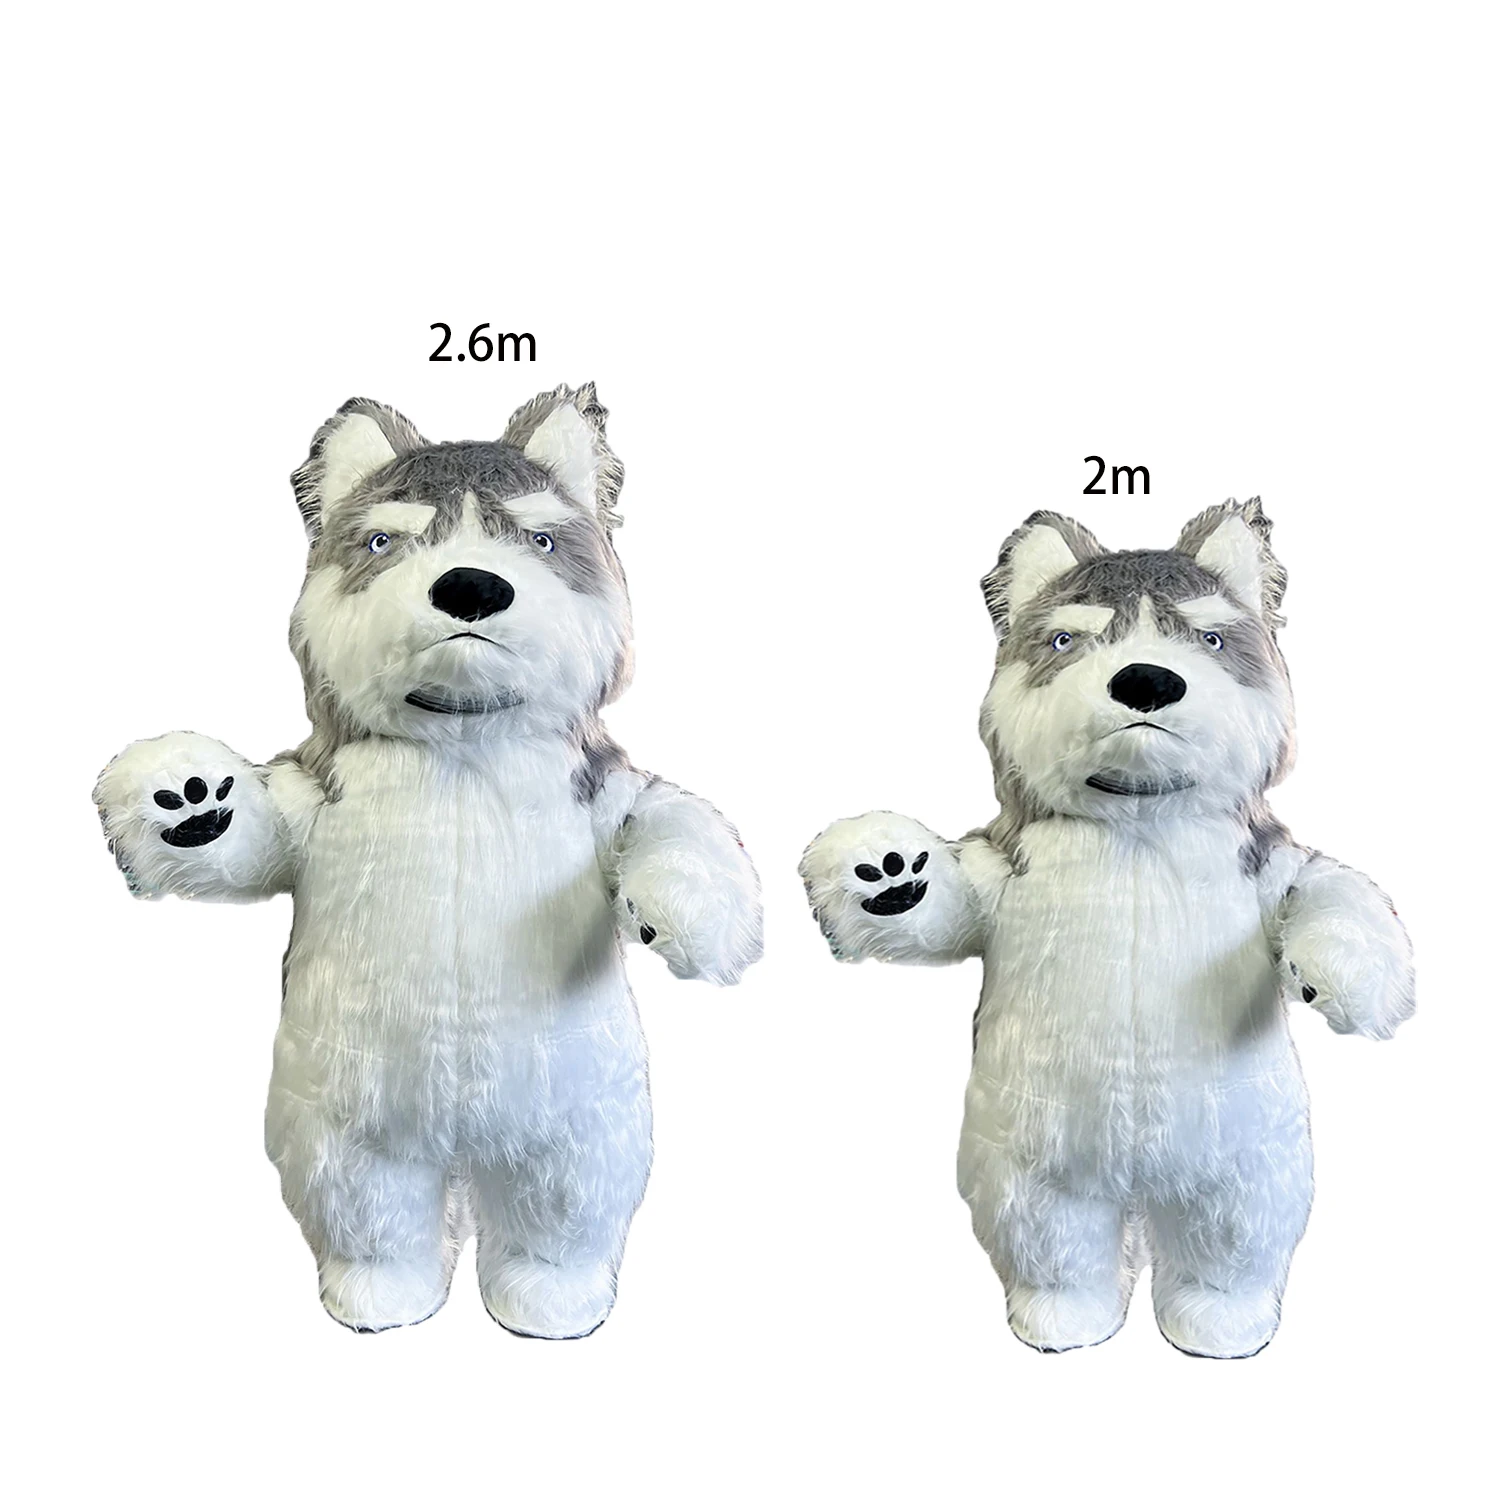 2.6m Husky Dog Mascot Costume Cosplay Furry Suit Halloween Party Mascotte Soft Fur Ventilate Inflatable Costumes For Adult